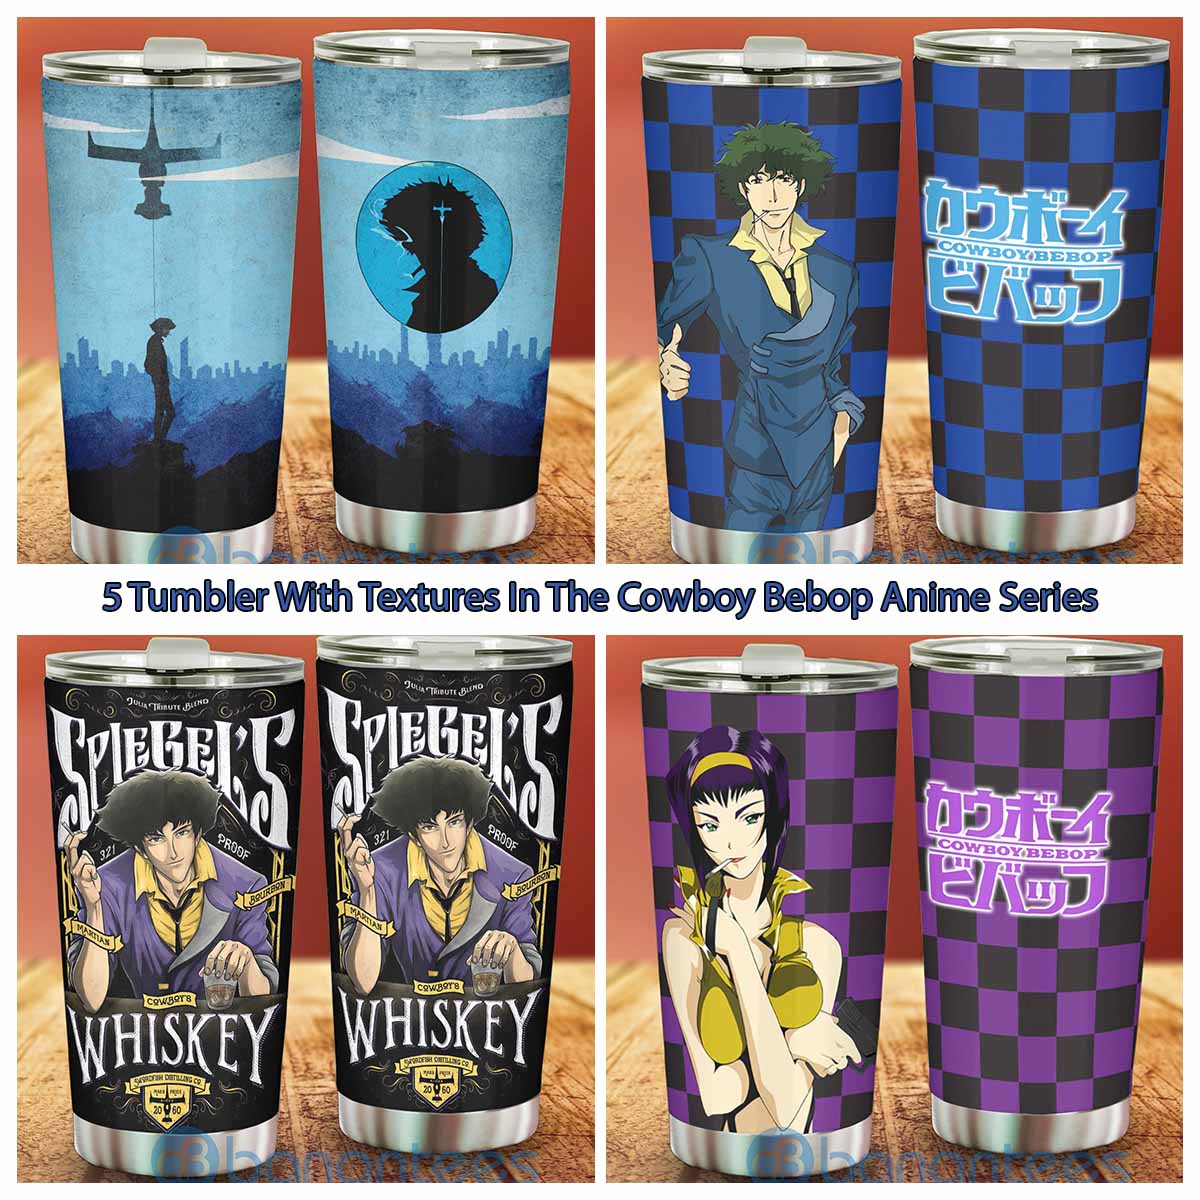 5 Tumbler With Textures In The Cowboy Bebop Anime Series